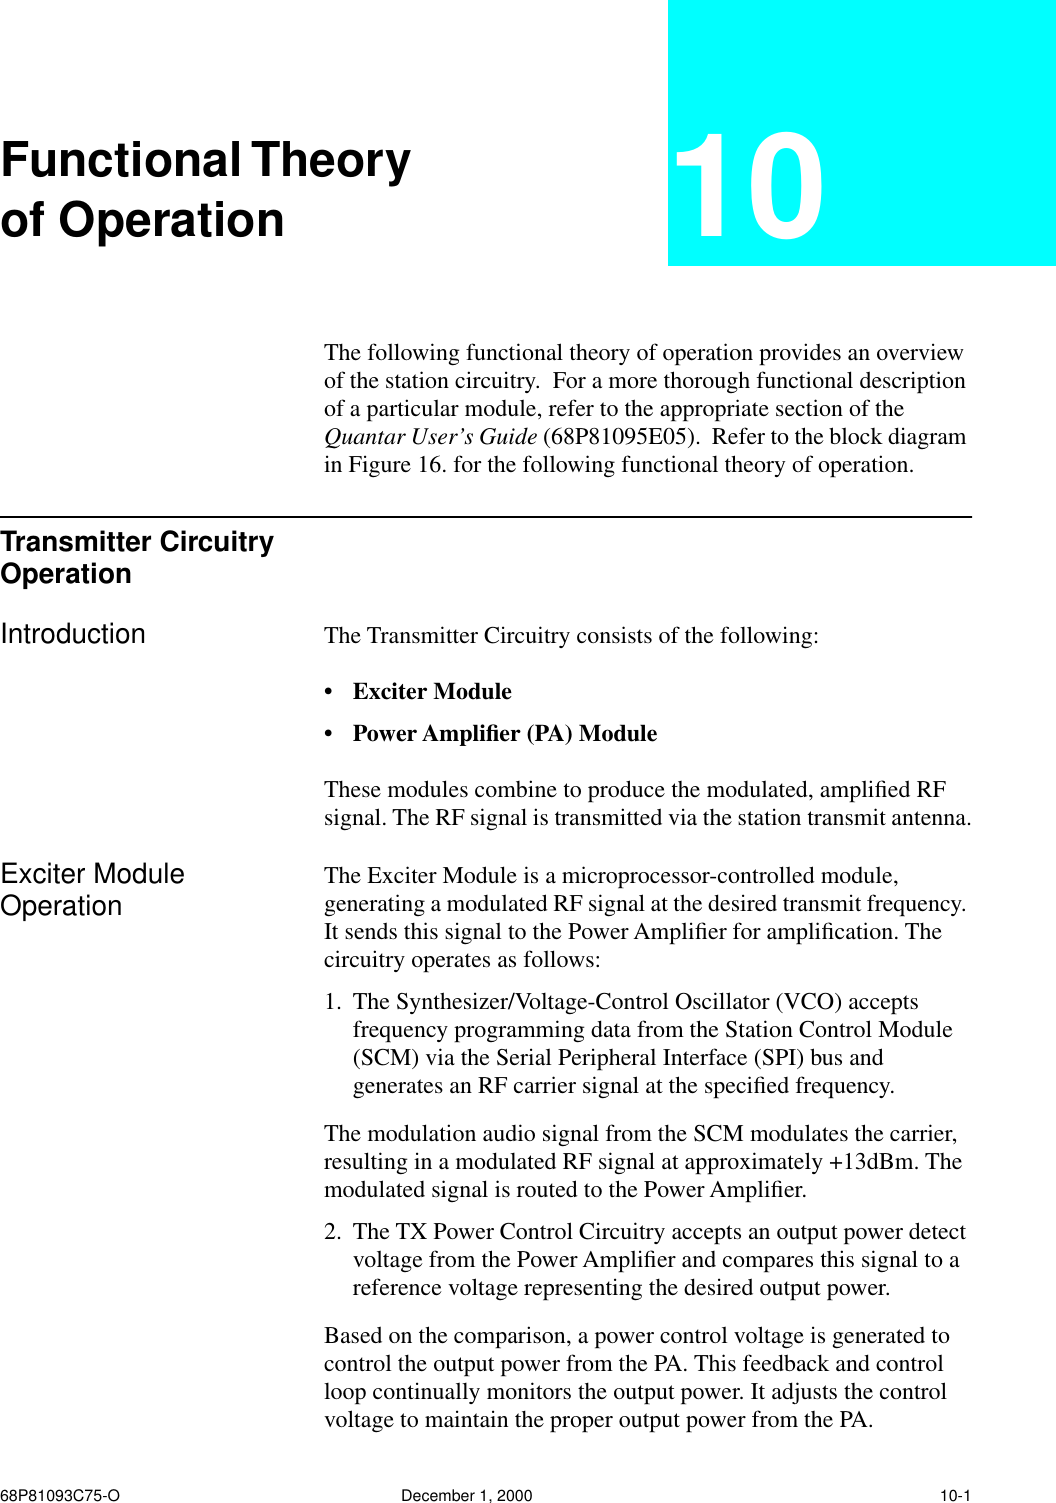 68P81093C75-O December 1, 2000 10-1Functional Theoryof Operation 10The following functional theory of operation provides an overview of the station circuitry.  For a more thorough functional description of a particular module, refer to the appropriate section of the Quantar User’s Guide (68P81095E05).  Refer to the block diagram in Figure 16. for the following functional theory of operation.Transmitter Circuitry OperationIntroduction The Transmitter Circuitry consists of the following: • Exciter Module • Power Ampliﬁer (PA) Module  These modules combine to produce the modulated, ampliﬁed RF signal. The RF signal is transmitted via the station transmit antenna.Exciter Module Operation The Exciter Module is a microprocessor-controlled module, generating a modulated RF signal at the desired transmit frequency. It sends this signal to the Power Ampliﬁer for ampliﬁcation. The circuitry operates as follows:1. The Synthesizer/Voltage-Control Oscillator (VCO) accepts frequency programming data from the Station Control Module (SCM) via the Serial Peripheral Interface (SPI) bus and generates an RF carrier signal at the speciﬁed frequency.  The modulation audio signal from the SCM modulates the carrier, resulting in a modulated RF signal at approximately +13dBm. The modulated signal is routed to the Power Ampliﬁer.2. The TX Power Control Circuitry accepts an output power detect voltage from the Power Ampliﬁer and compares this signal to a reference voltage representing the desired output power. Based on the comparison, a power control voltage is generated to control the output power from the PA. This feedback and control loop continually monitors the output power. It adjusts the control voltage to maintain the proper output power from the PA.